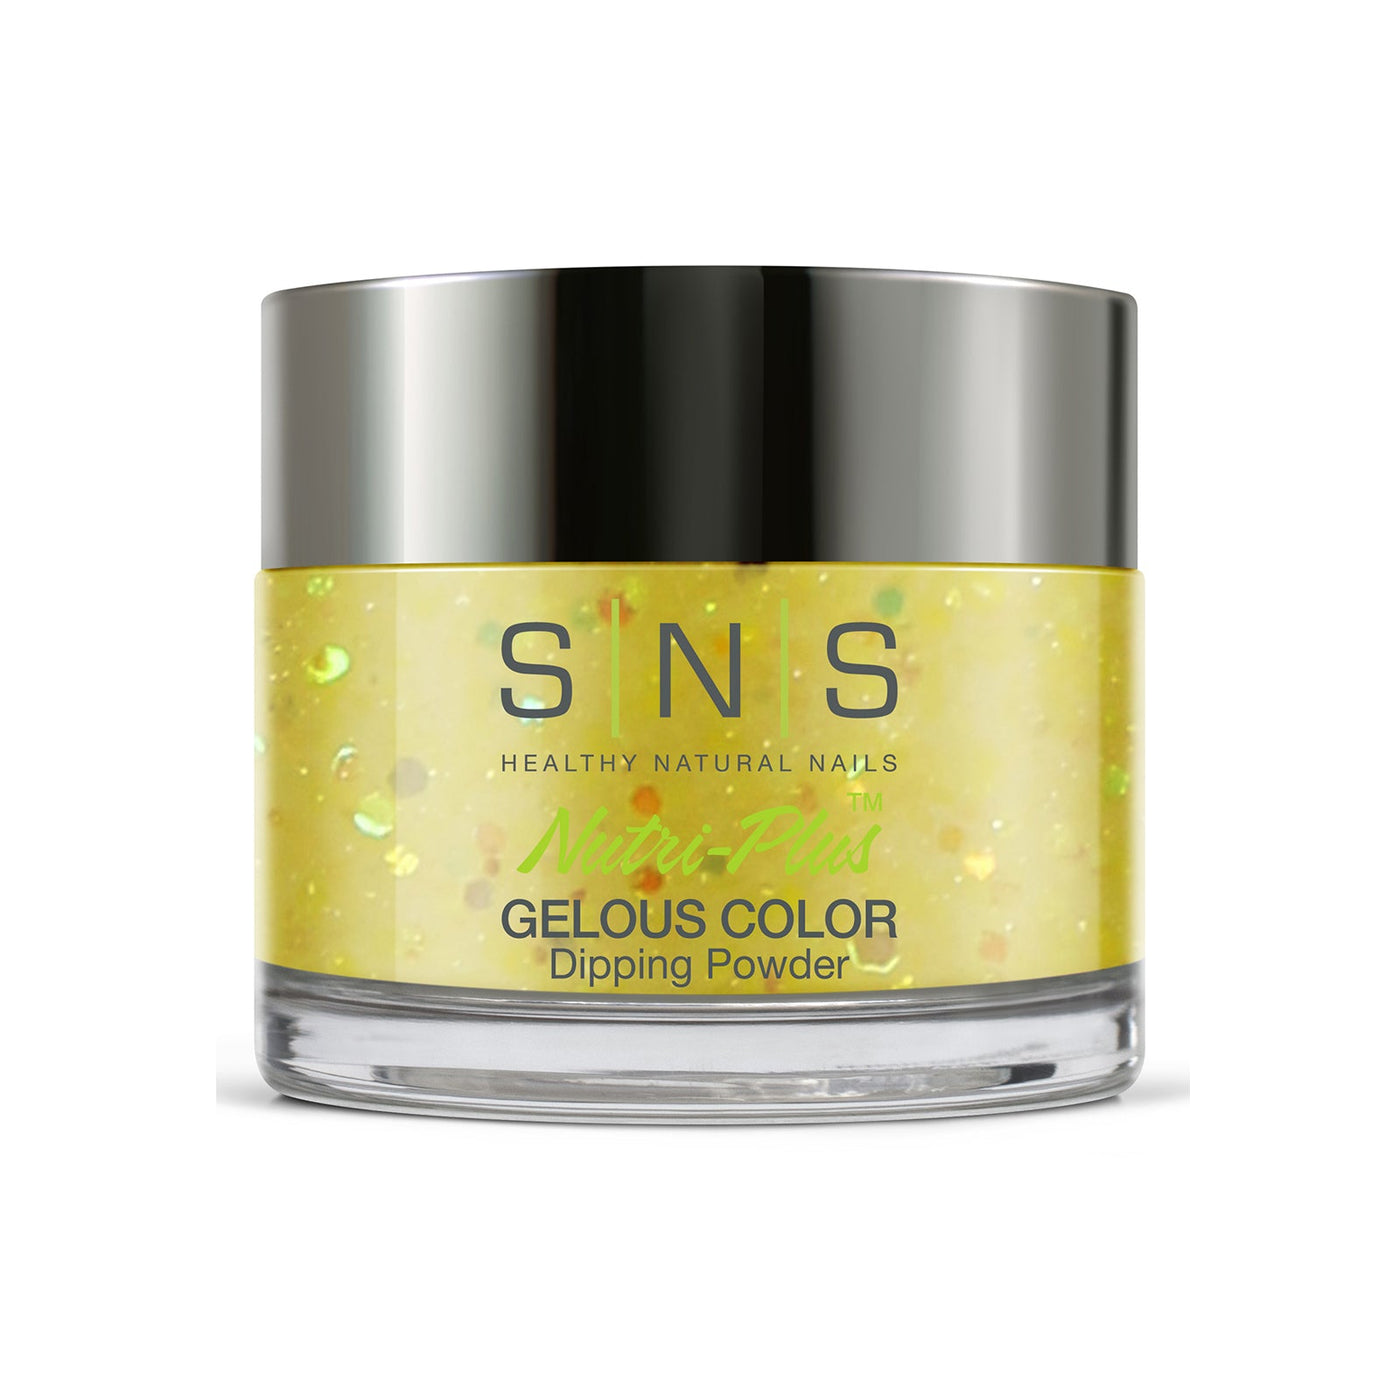 SNS Gelous Color Dipping Powder DW33 Tulum By The Sea (43g) packaging